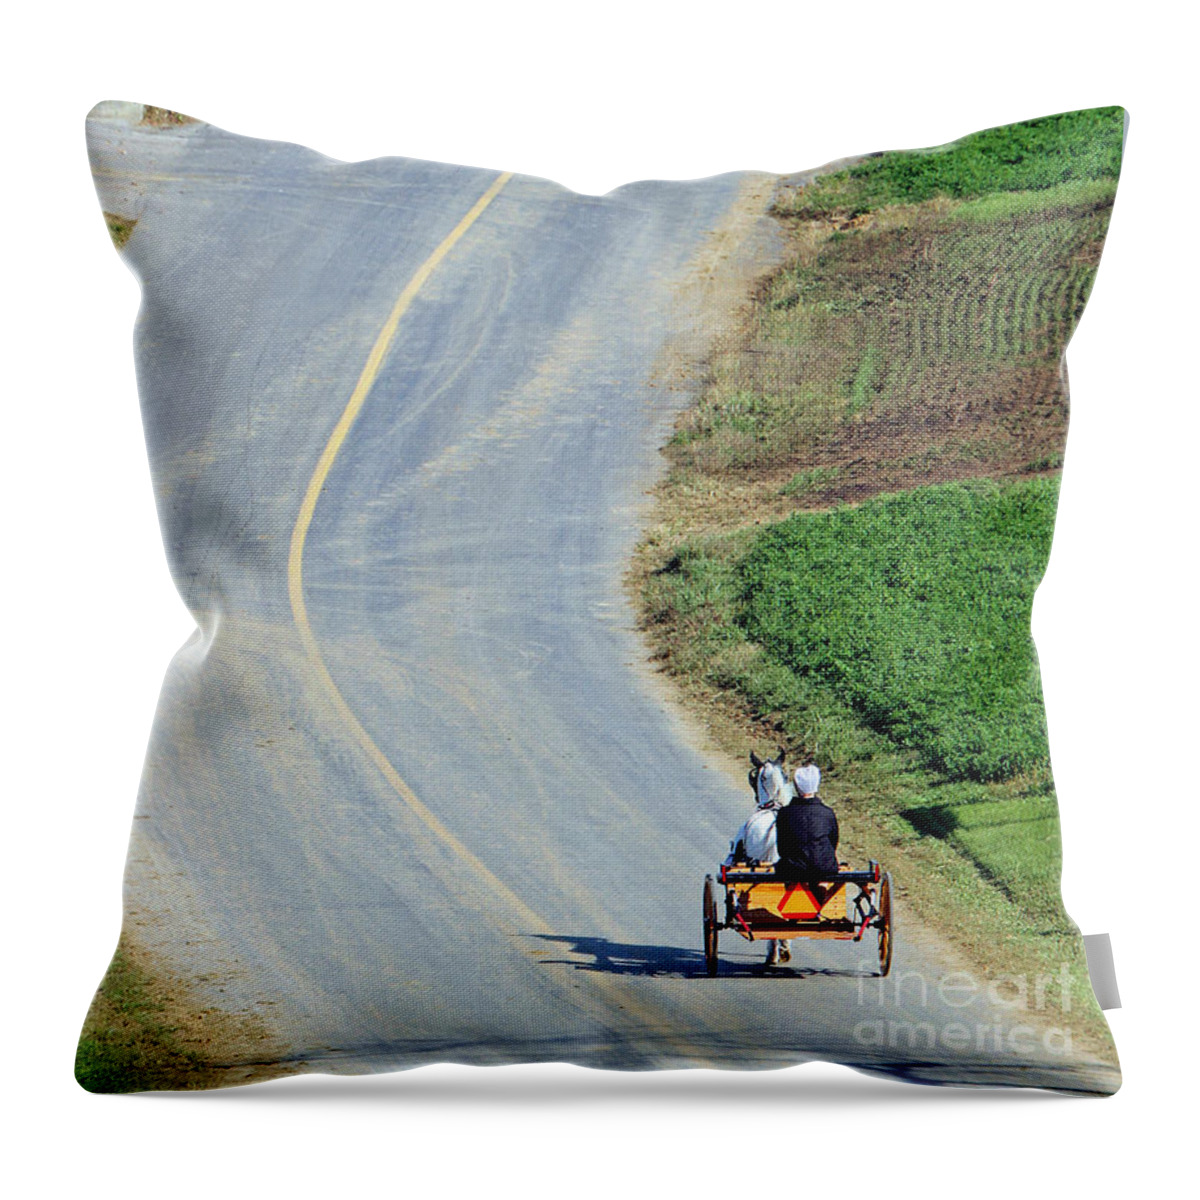 Amish Throw Pillow featuring the photograph Onward And Upward by Geoff Crego